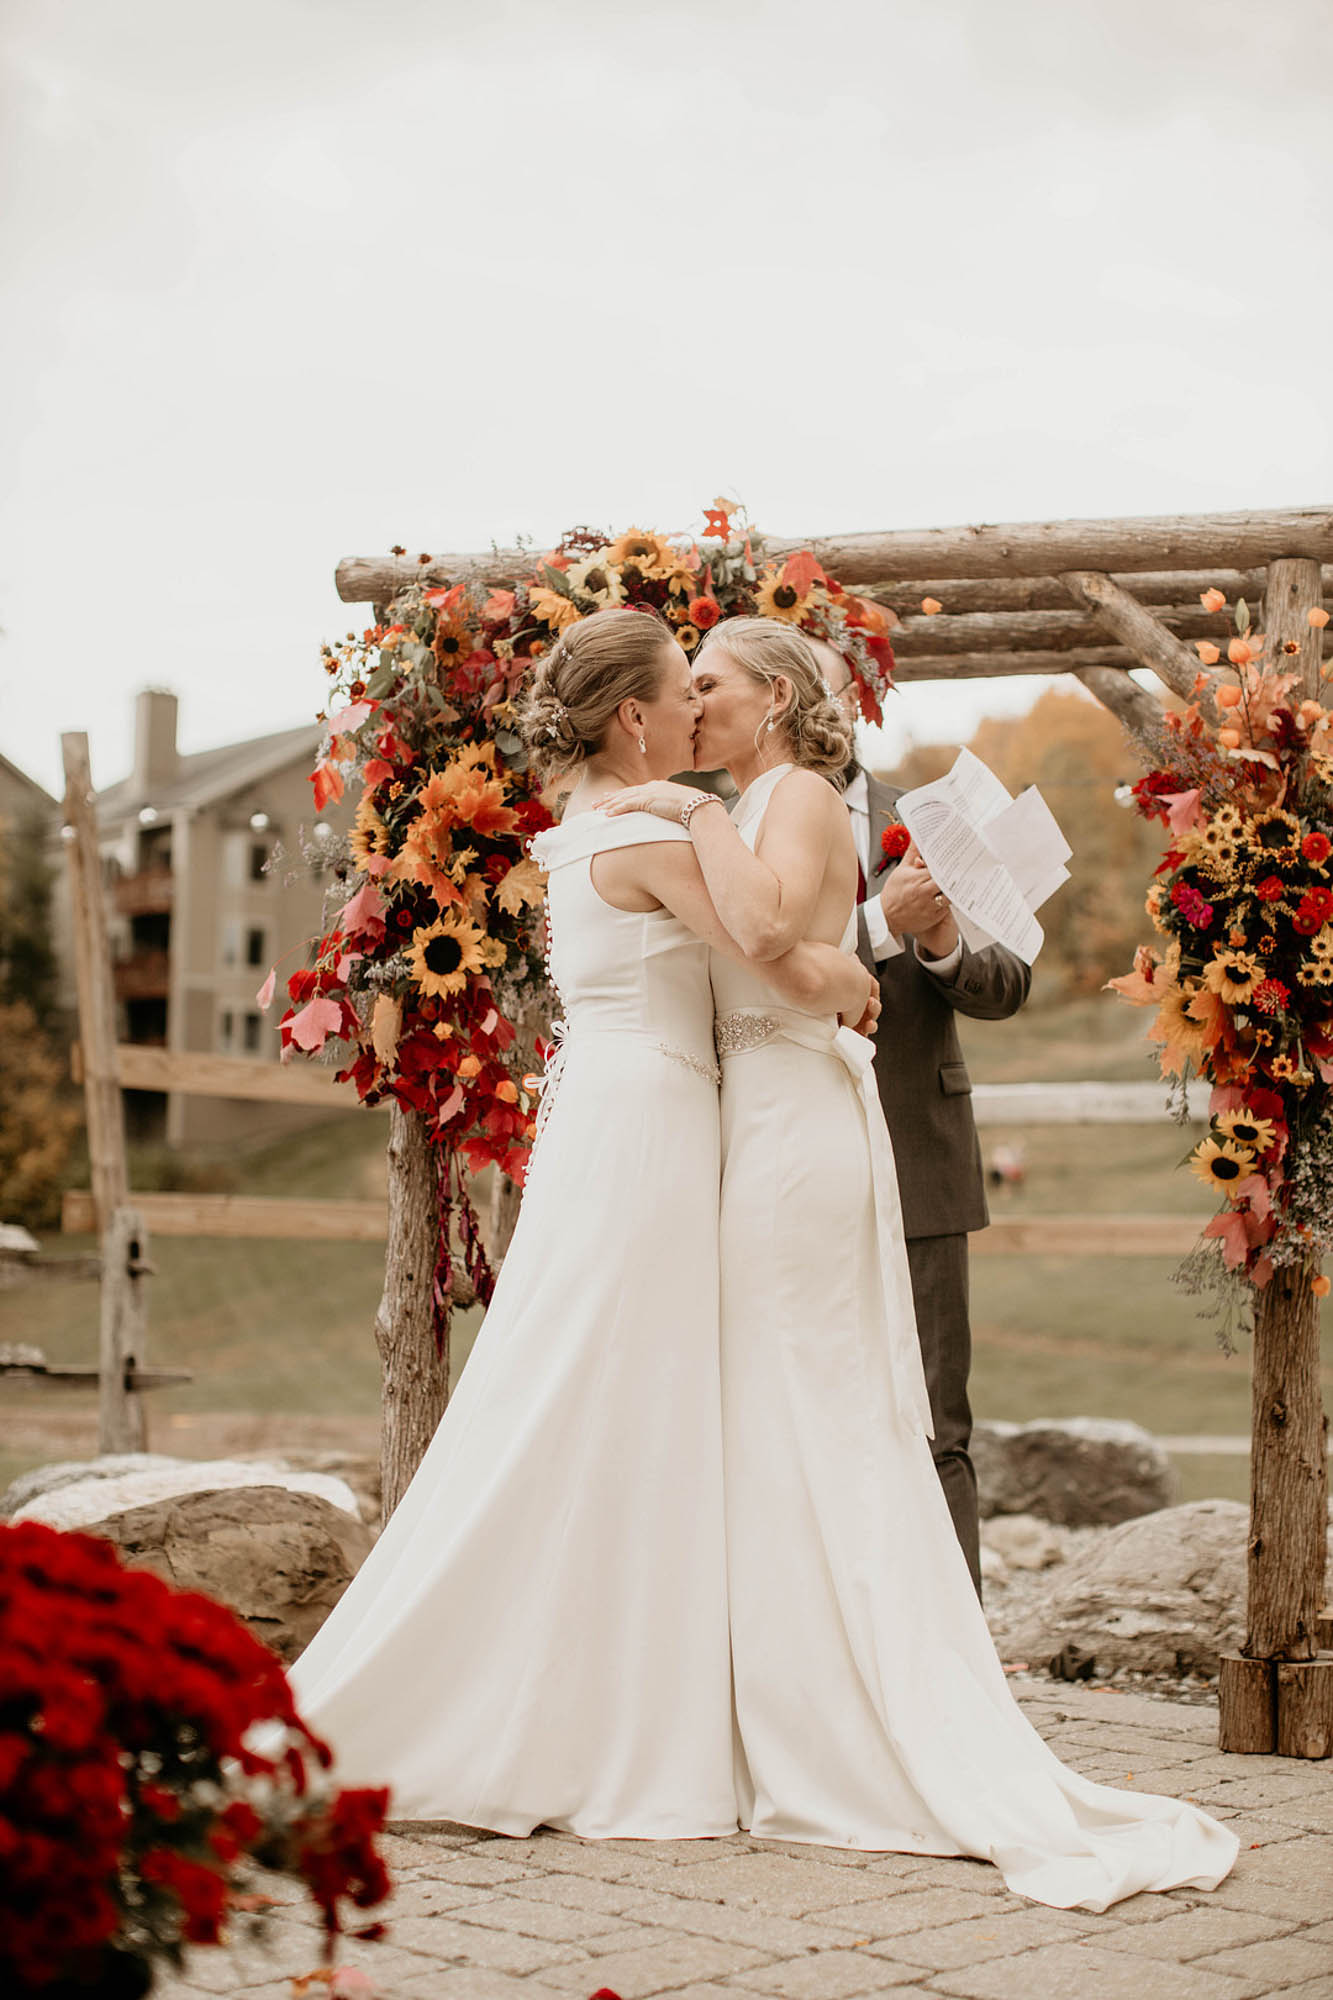 An intimate mountain wedding after a romantic double proposal | Seas mtns co | Featured on Equally Wed, the leading LGBTQ+ wedding magazine